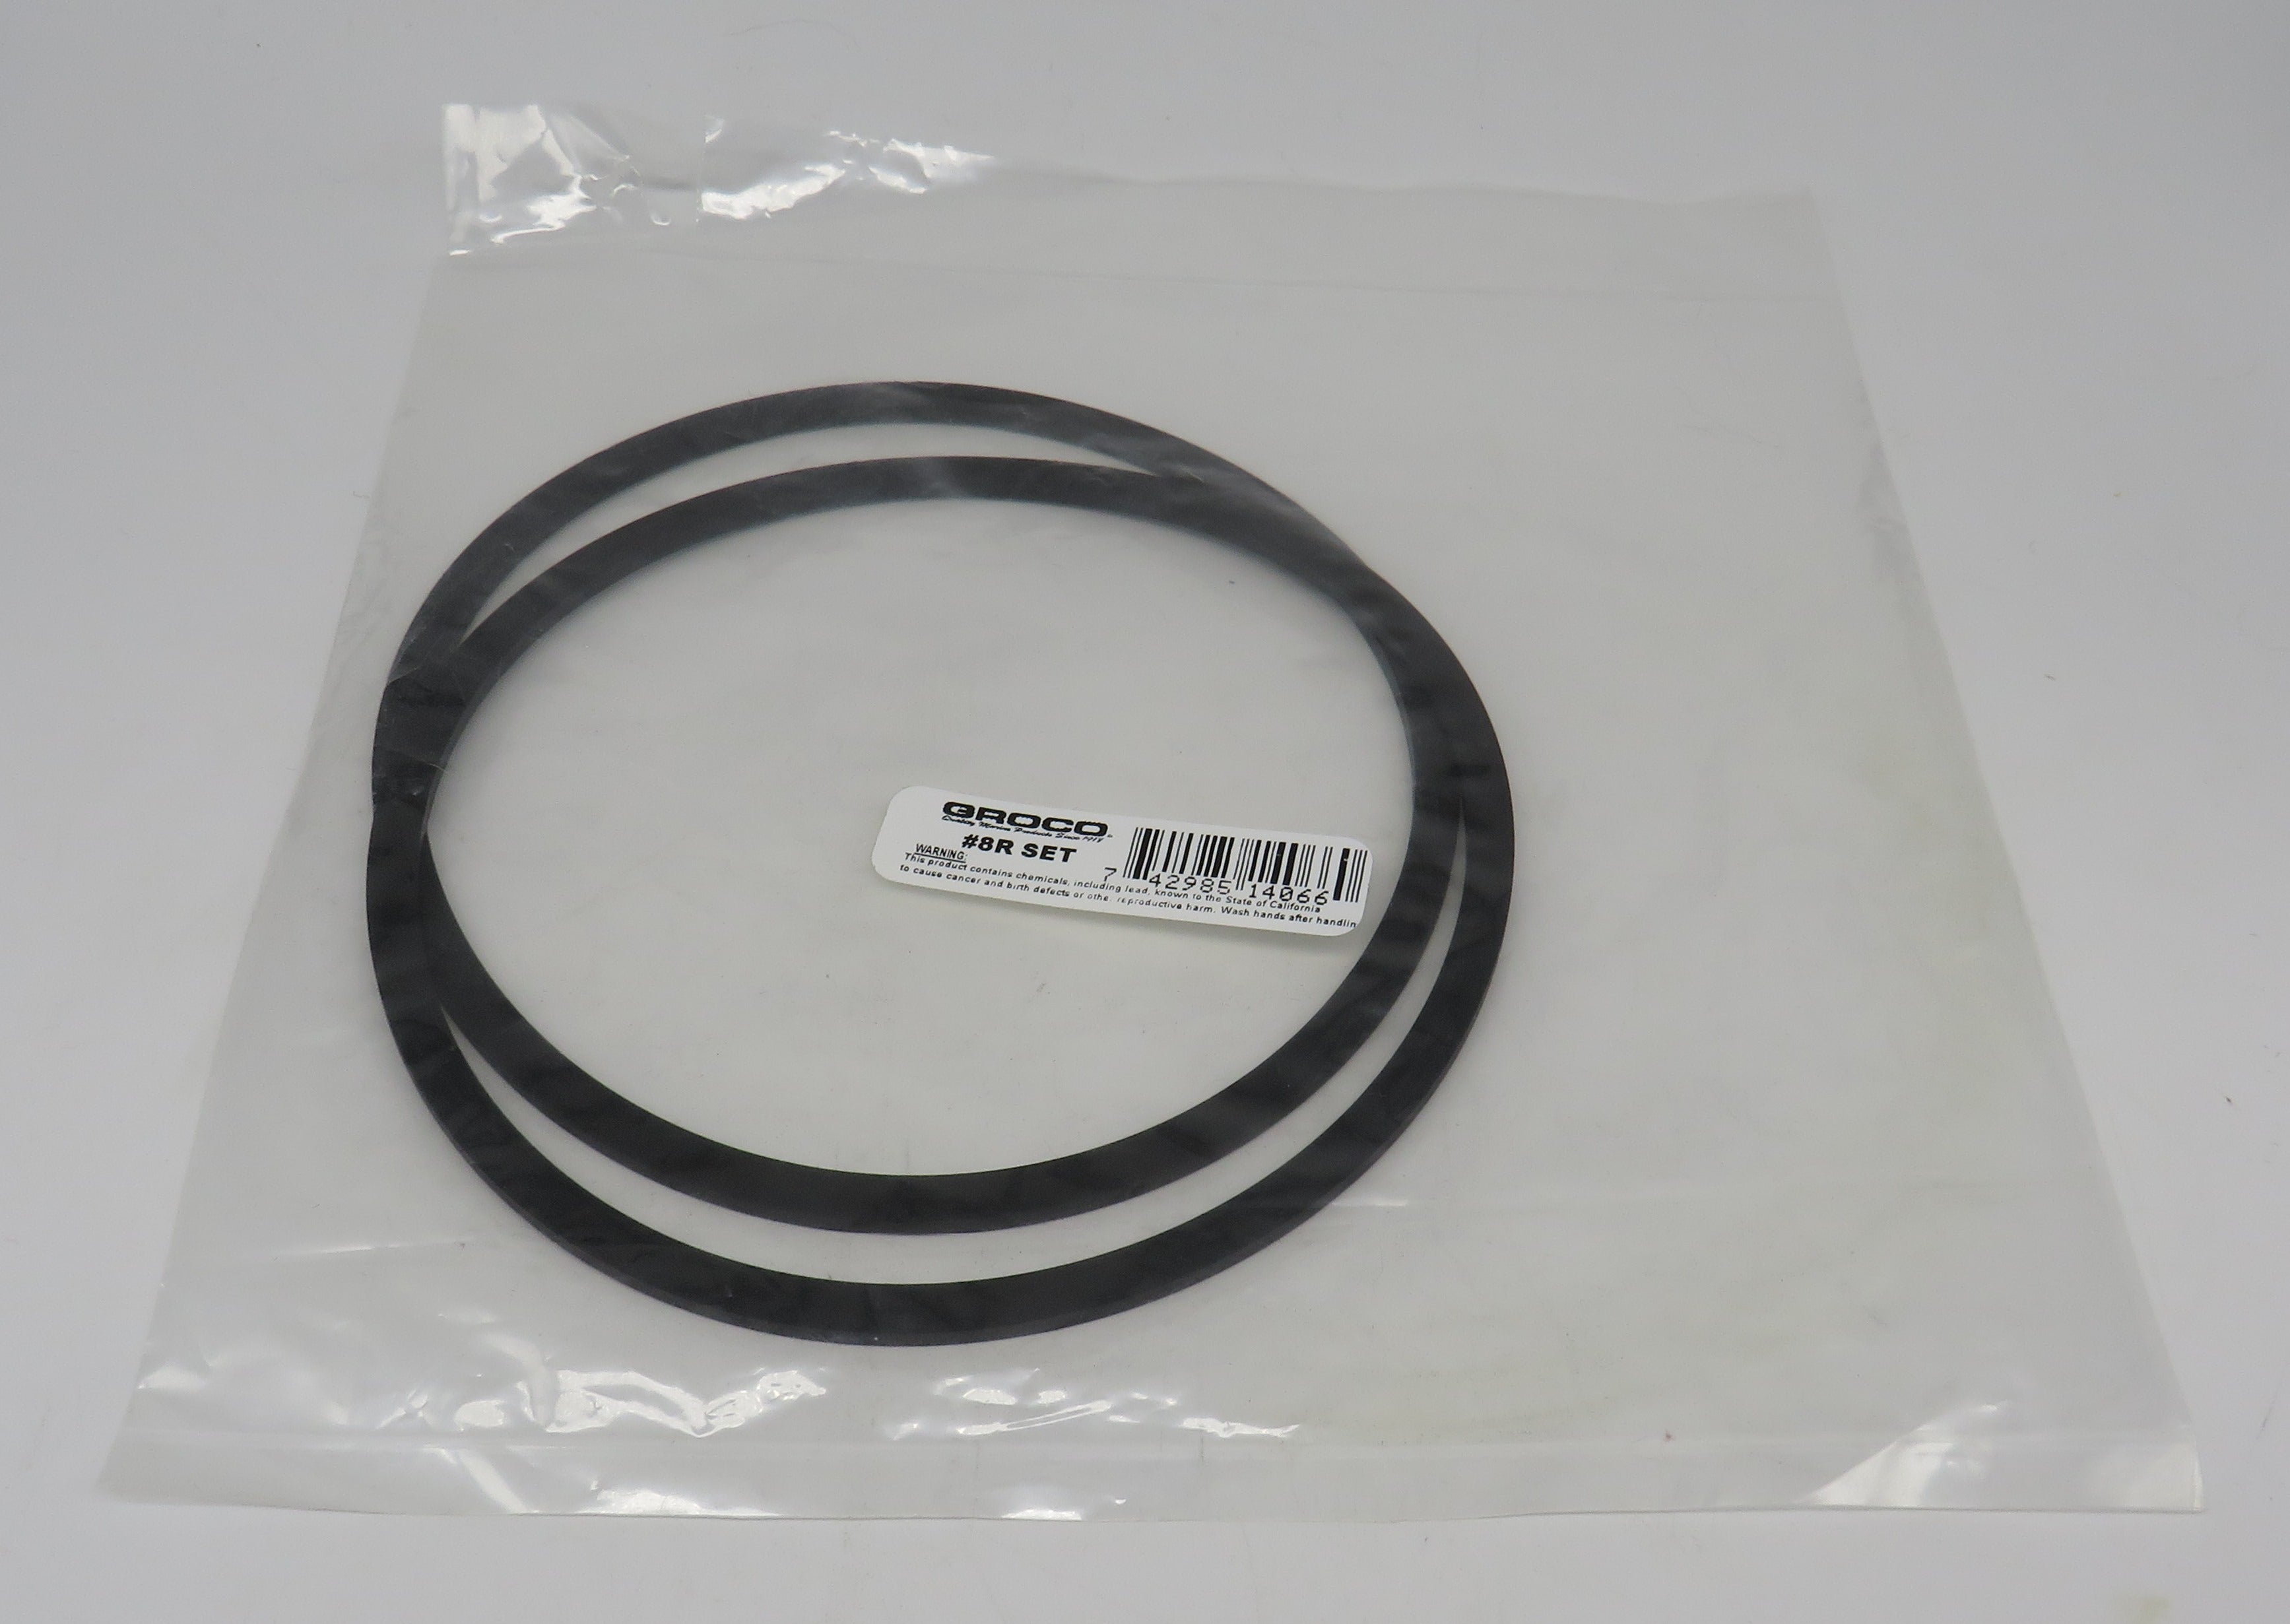 8R Groco #8 Rubber Gaskets (Set of 2)